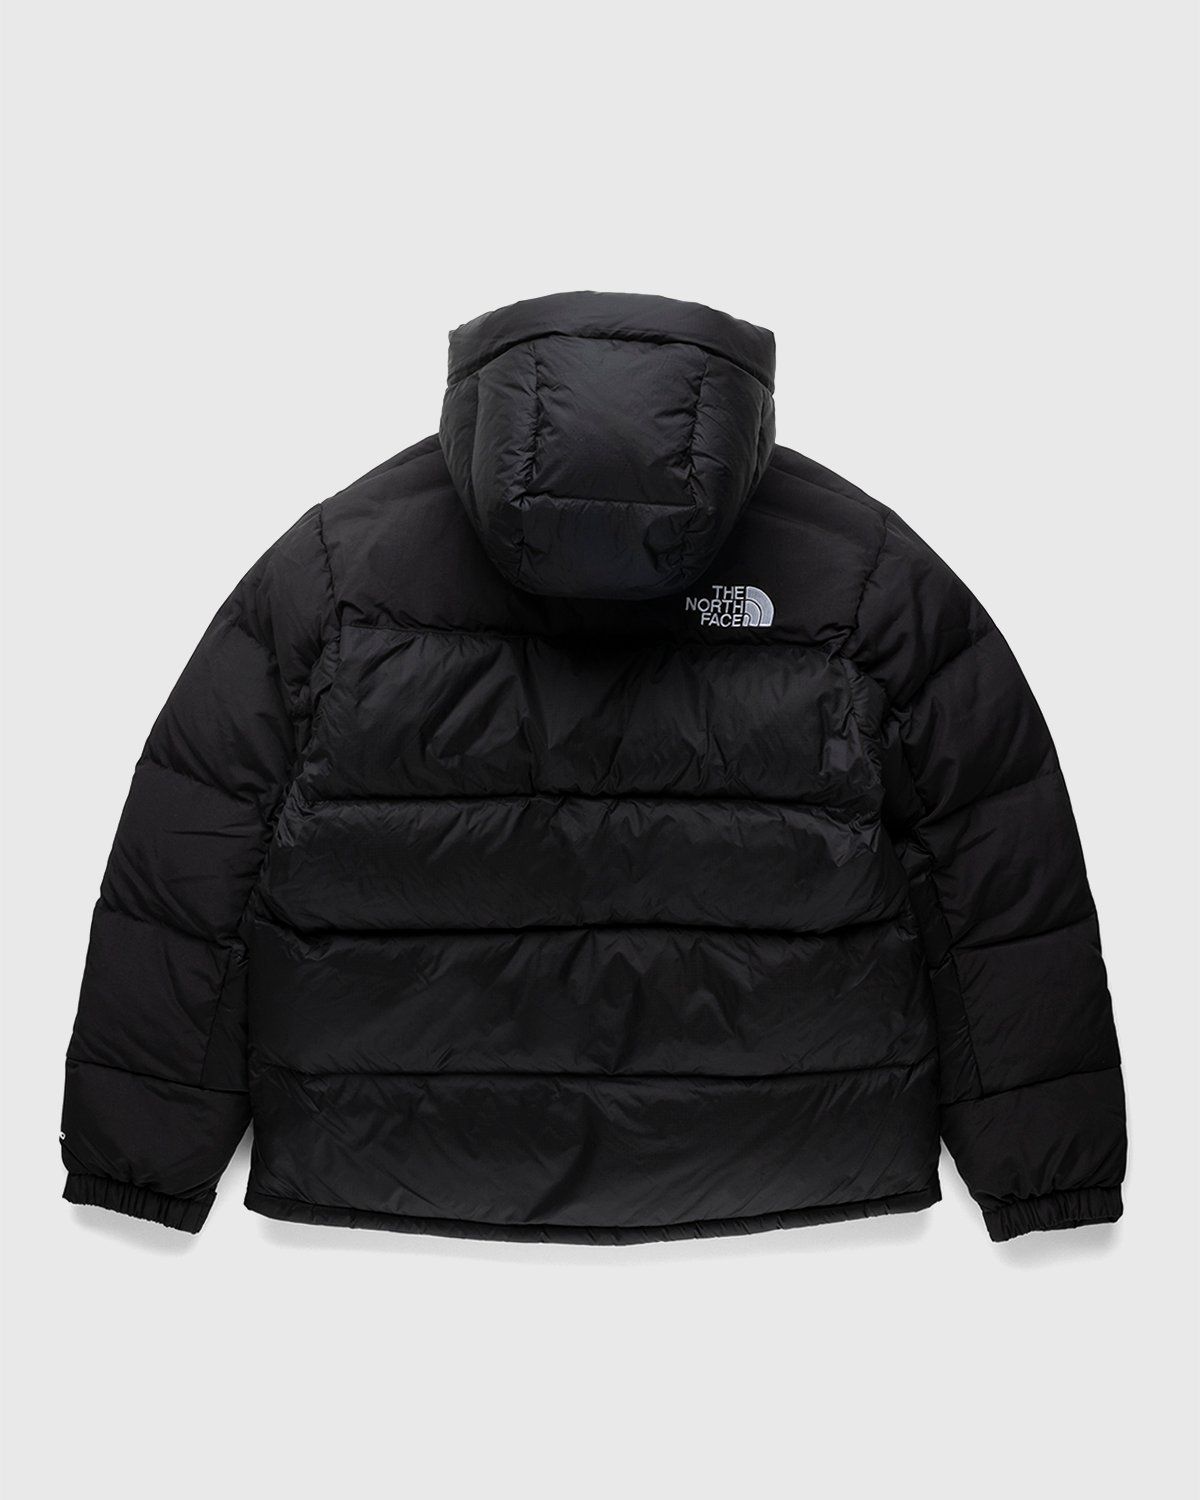 The North Face – Himalayan Down Parka Black - Outerwear - Black - Image 2